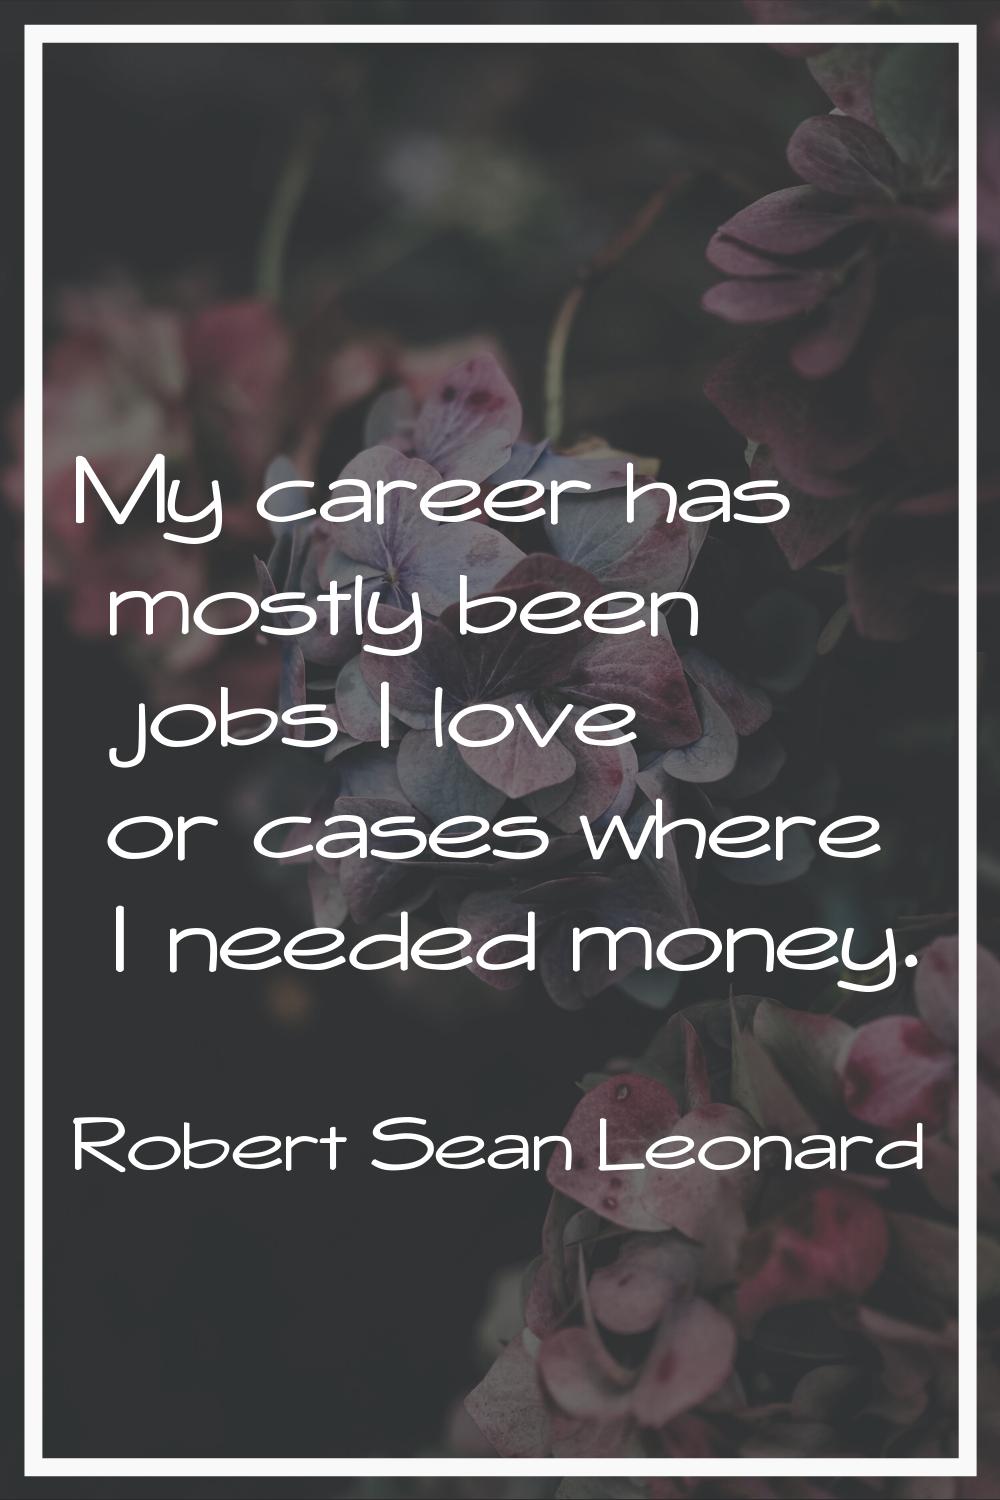 My career has mostly been jobs I love or cases where I needed money.